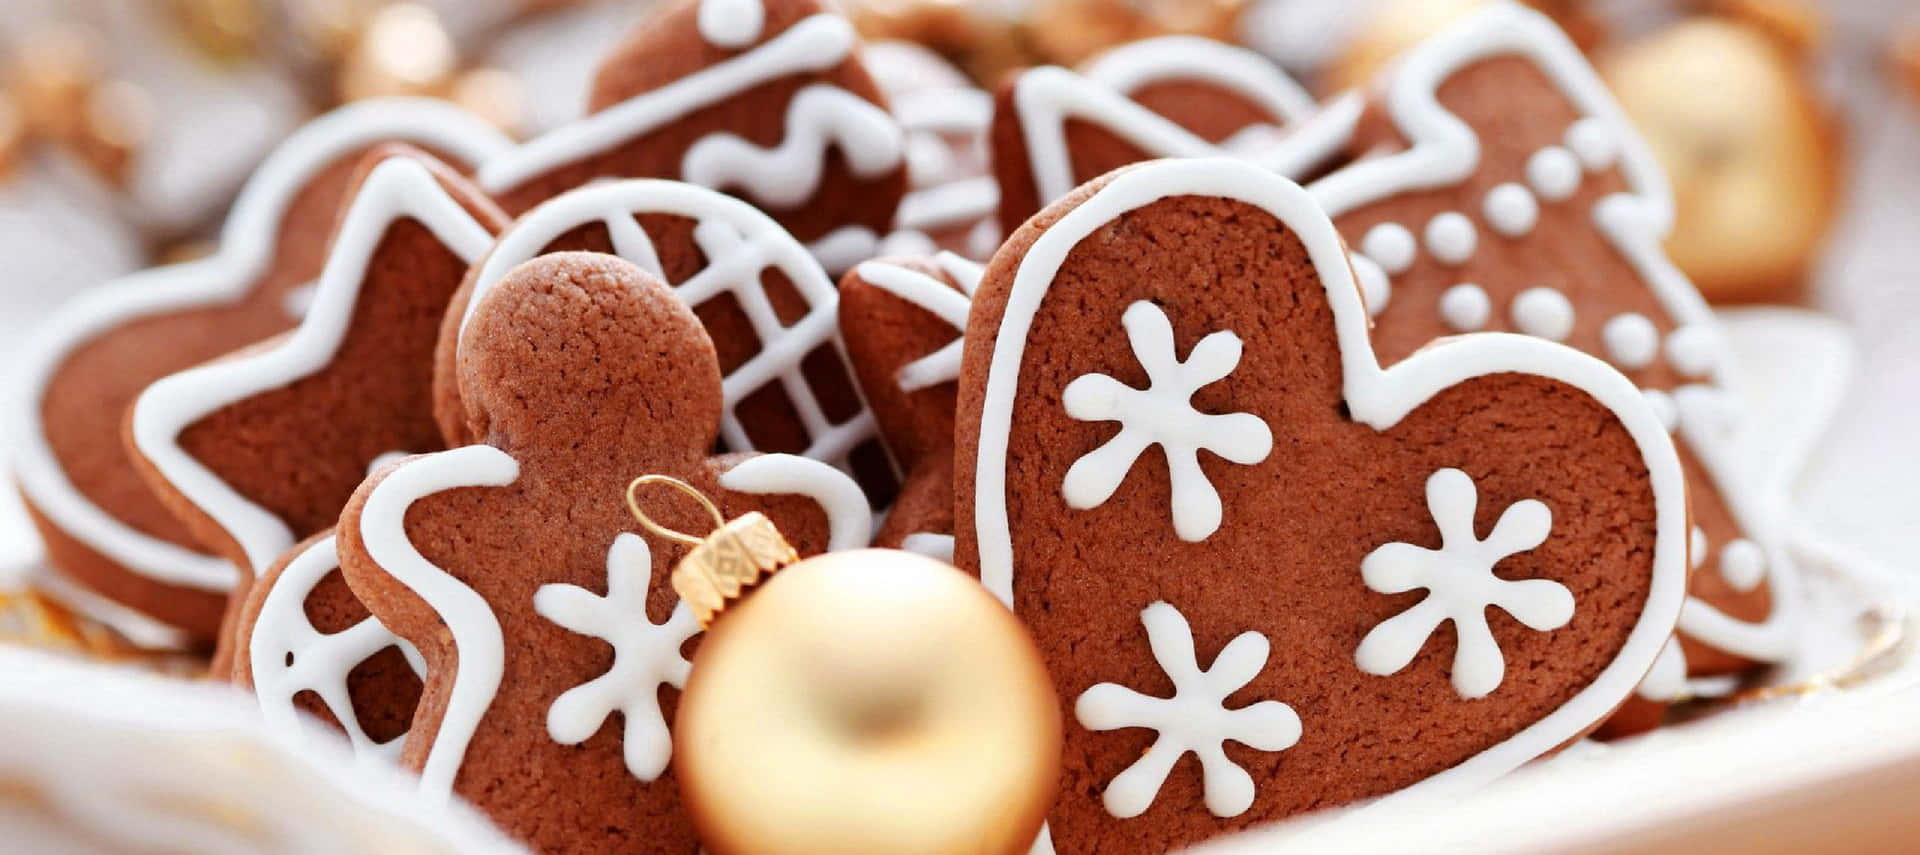 Gingerbread Cookies With Gold Decorations On A Plate